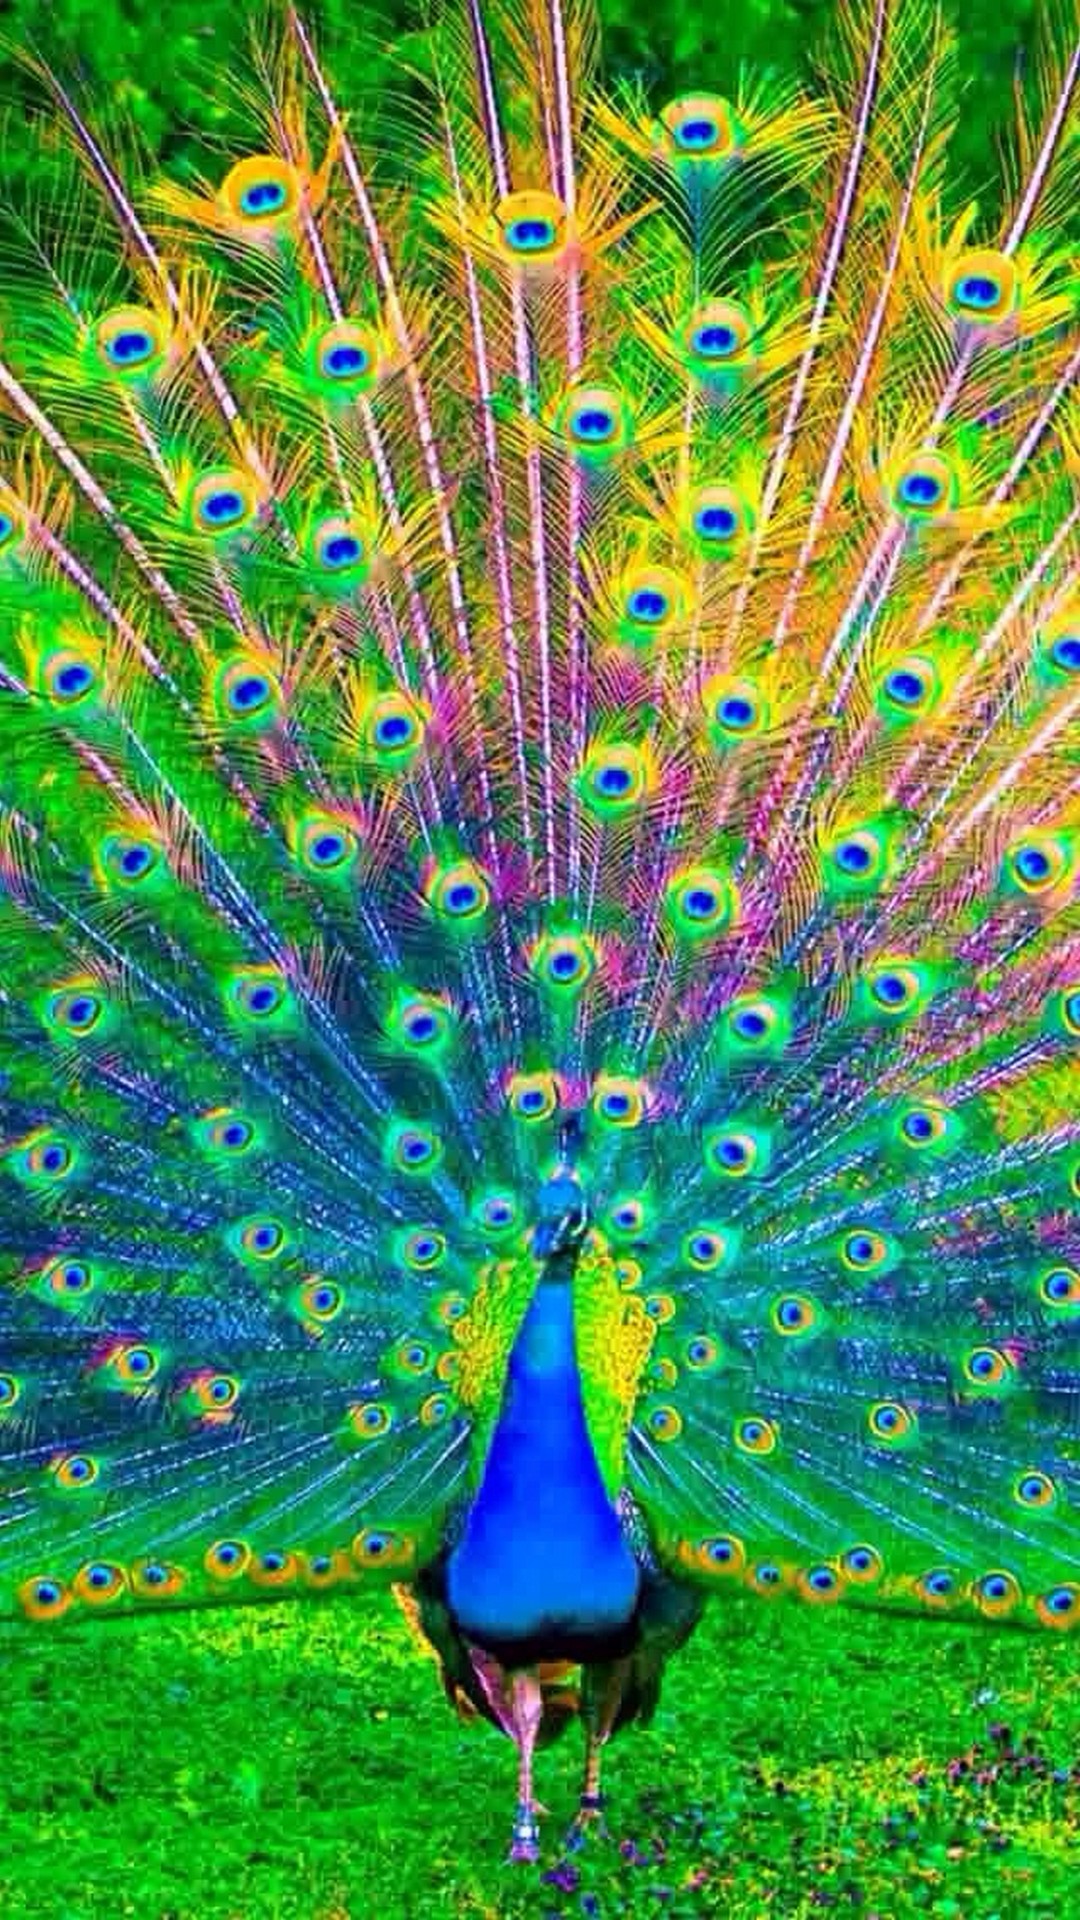 Peacock Wallpaper For Iphone Resolution - Peacock Wallpaper For Mobile - HD Wallpaper 